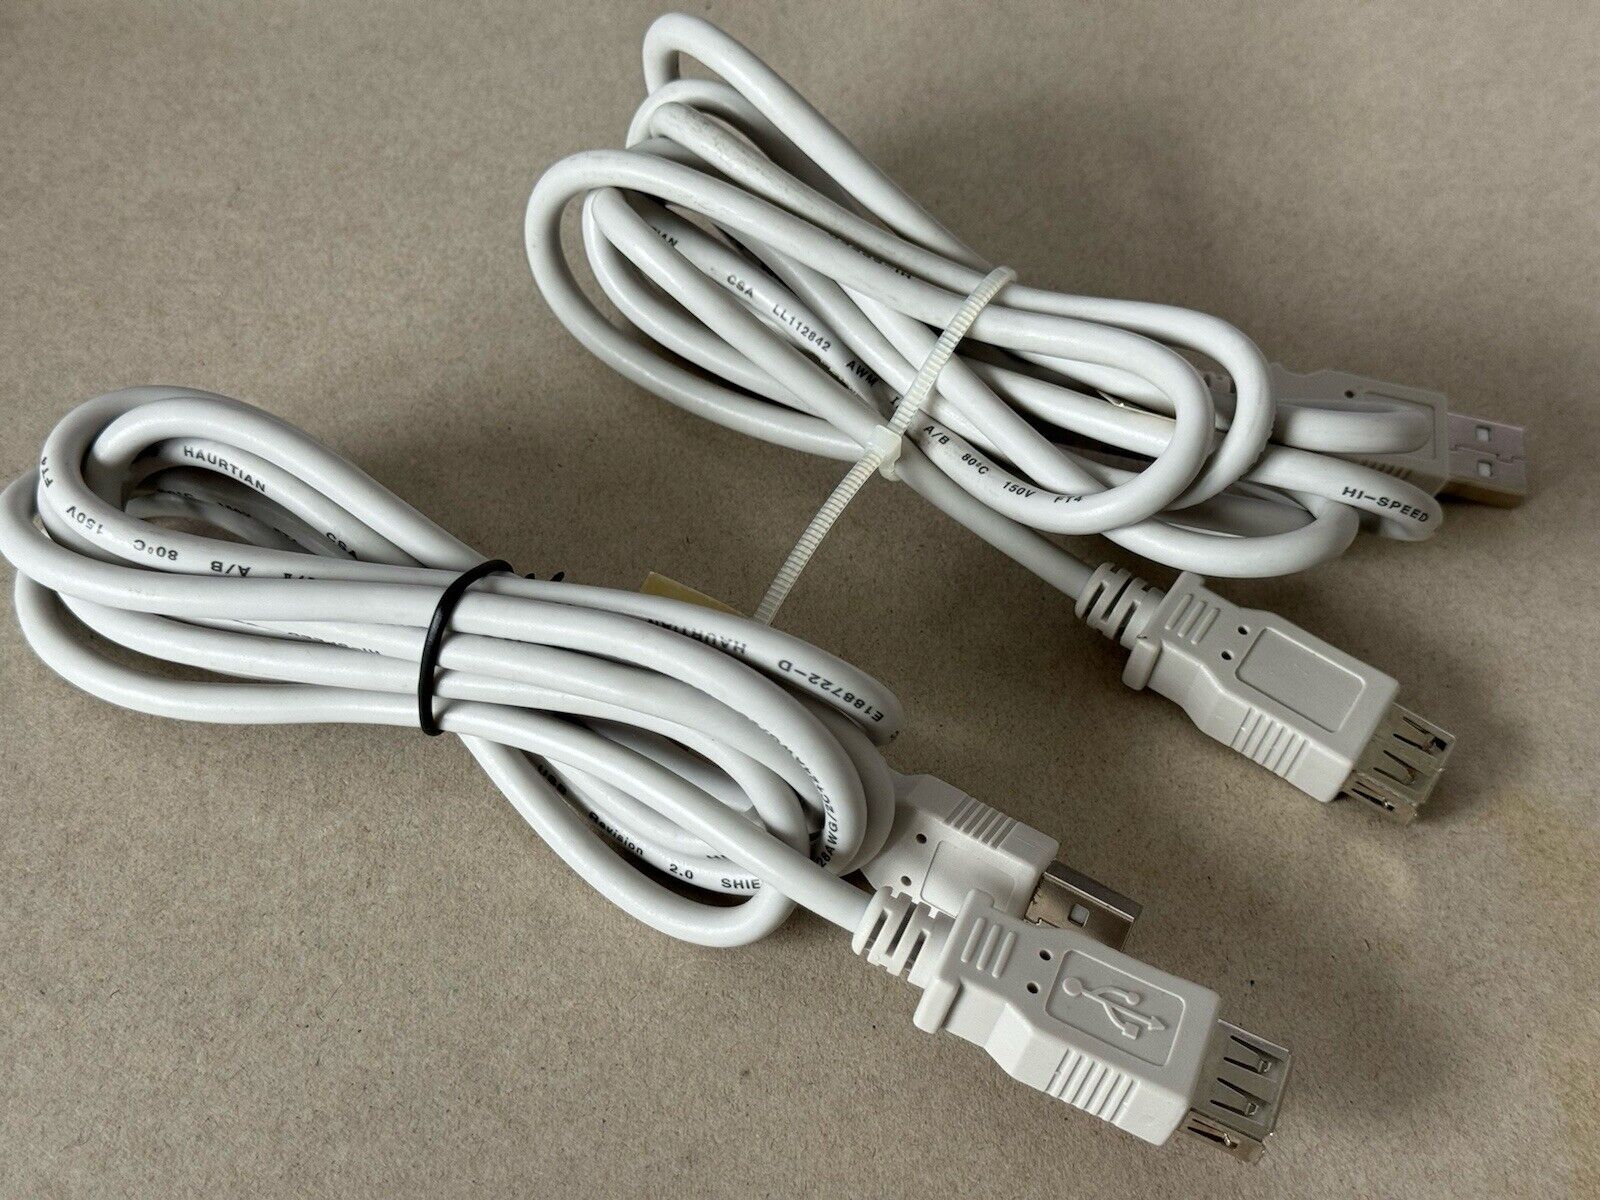 Qty 2 USB Extension Cables - USB 2.0 A Male to A Female Gray - 6 Foot Each Cable